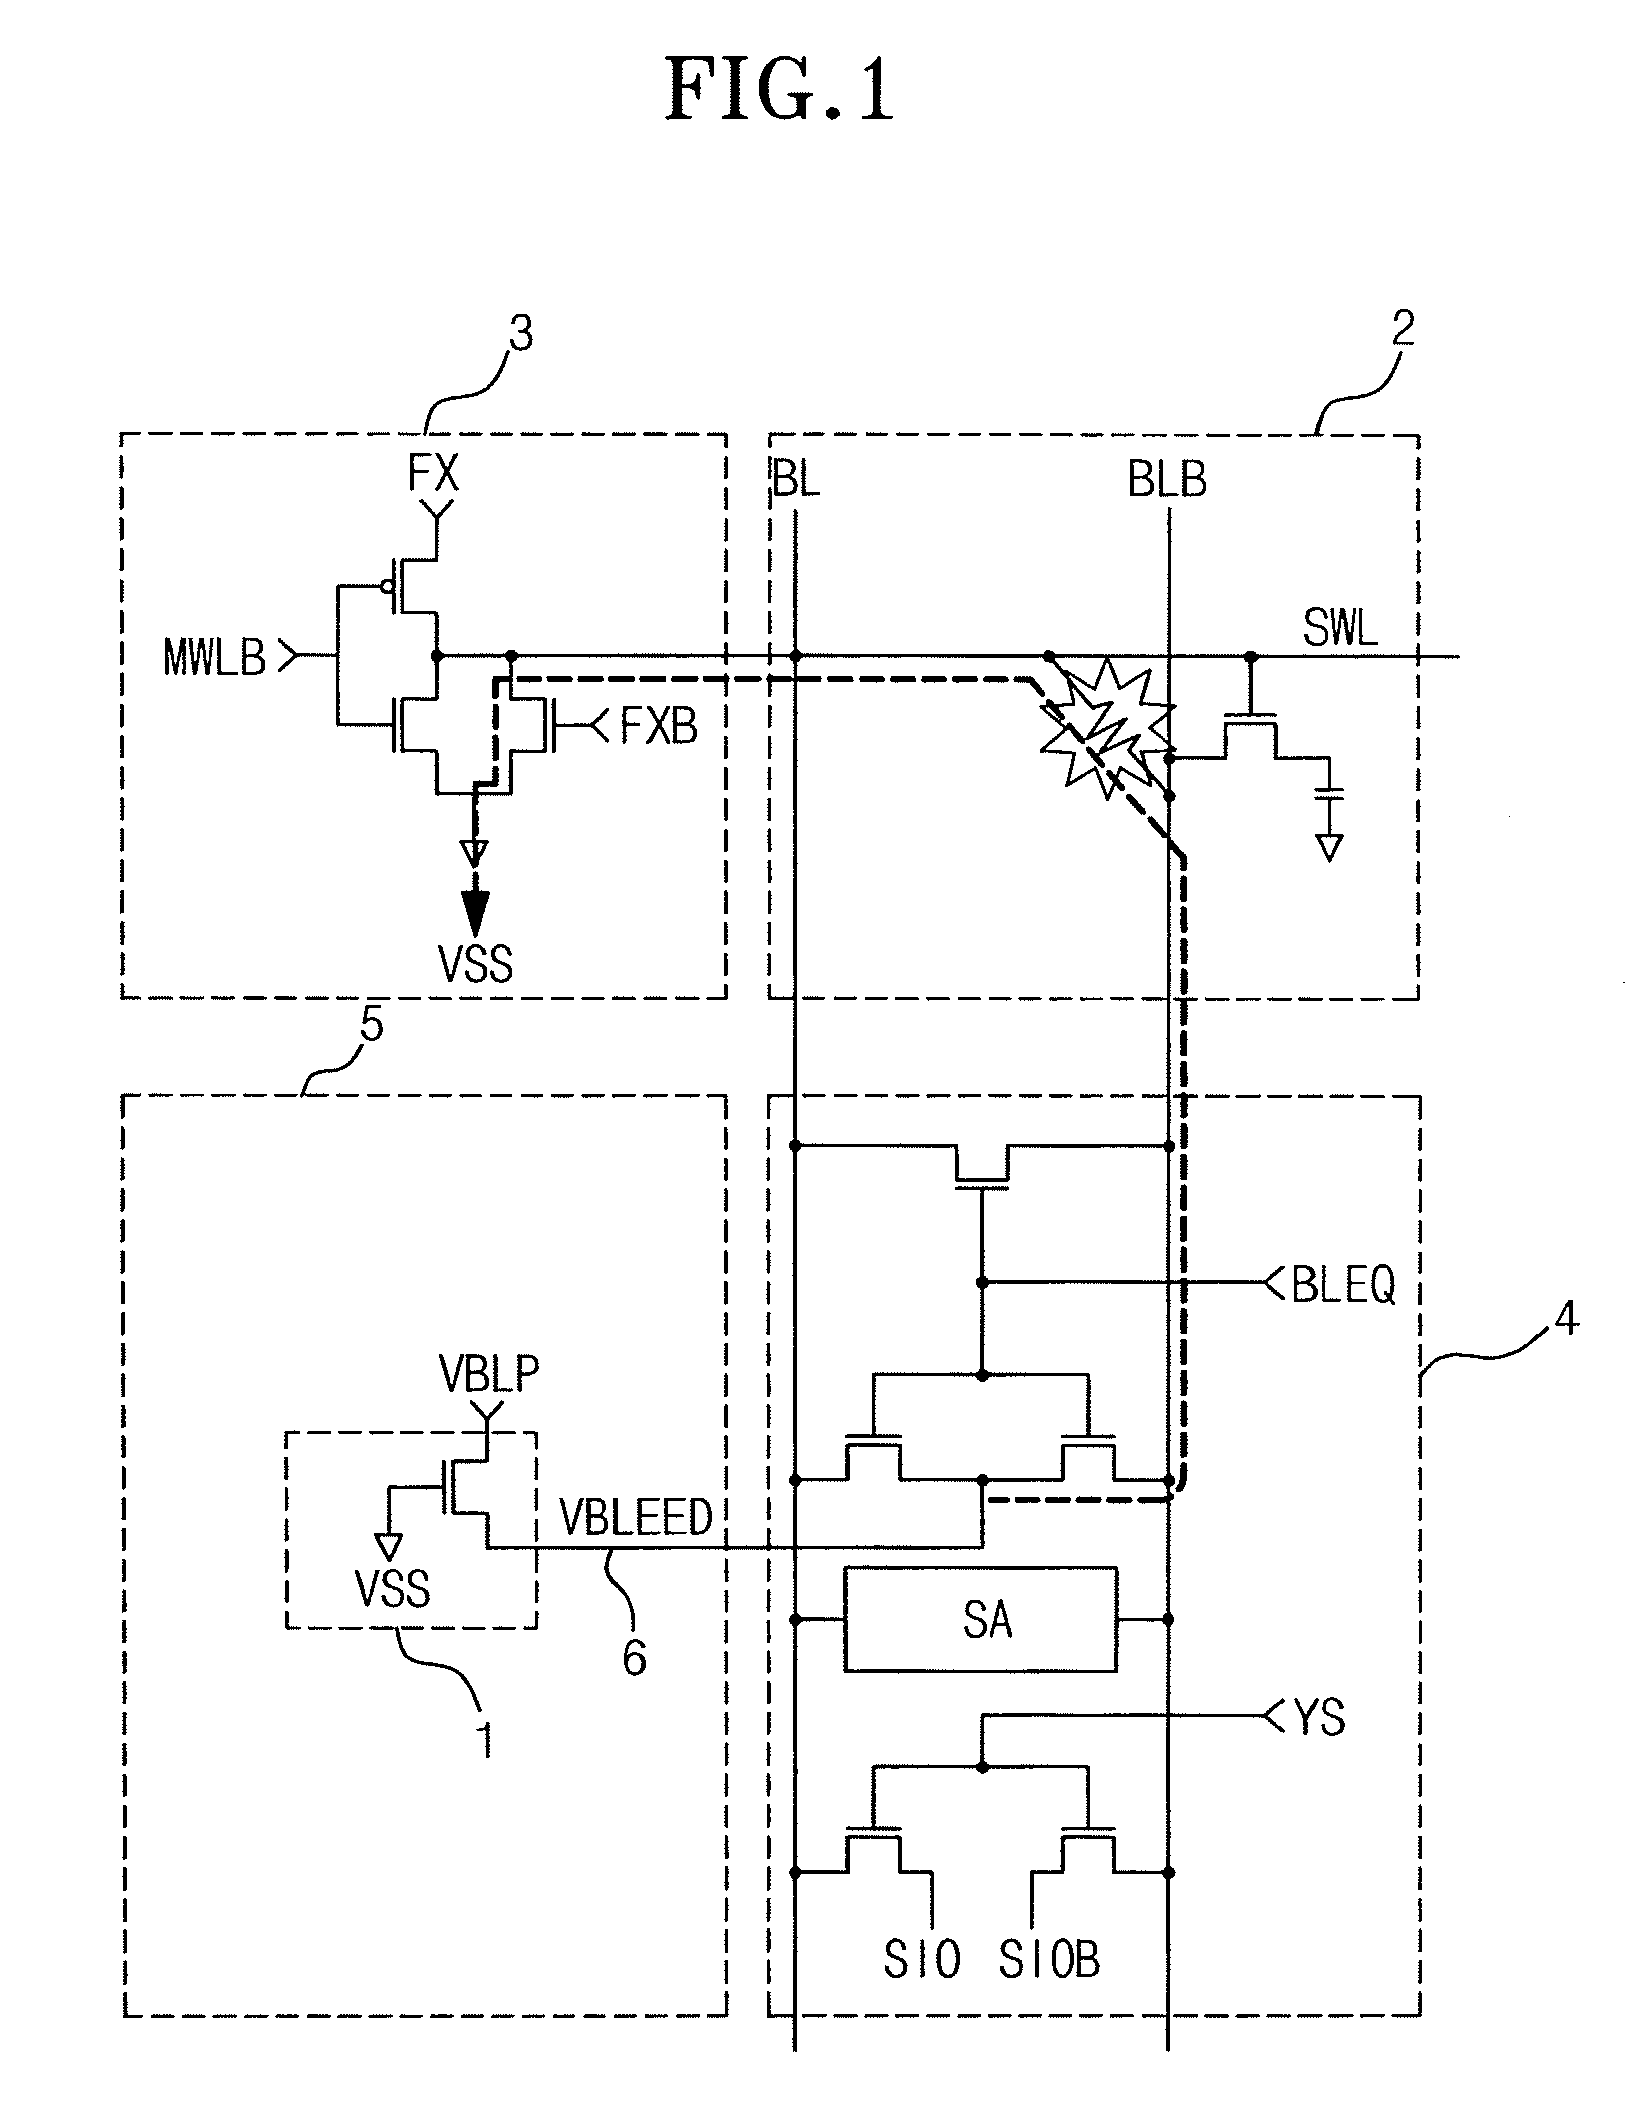 Voltage control circuit, a voltage control method and a semiconductor memory device having the voltage control circuit